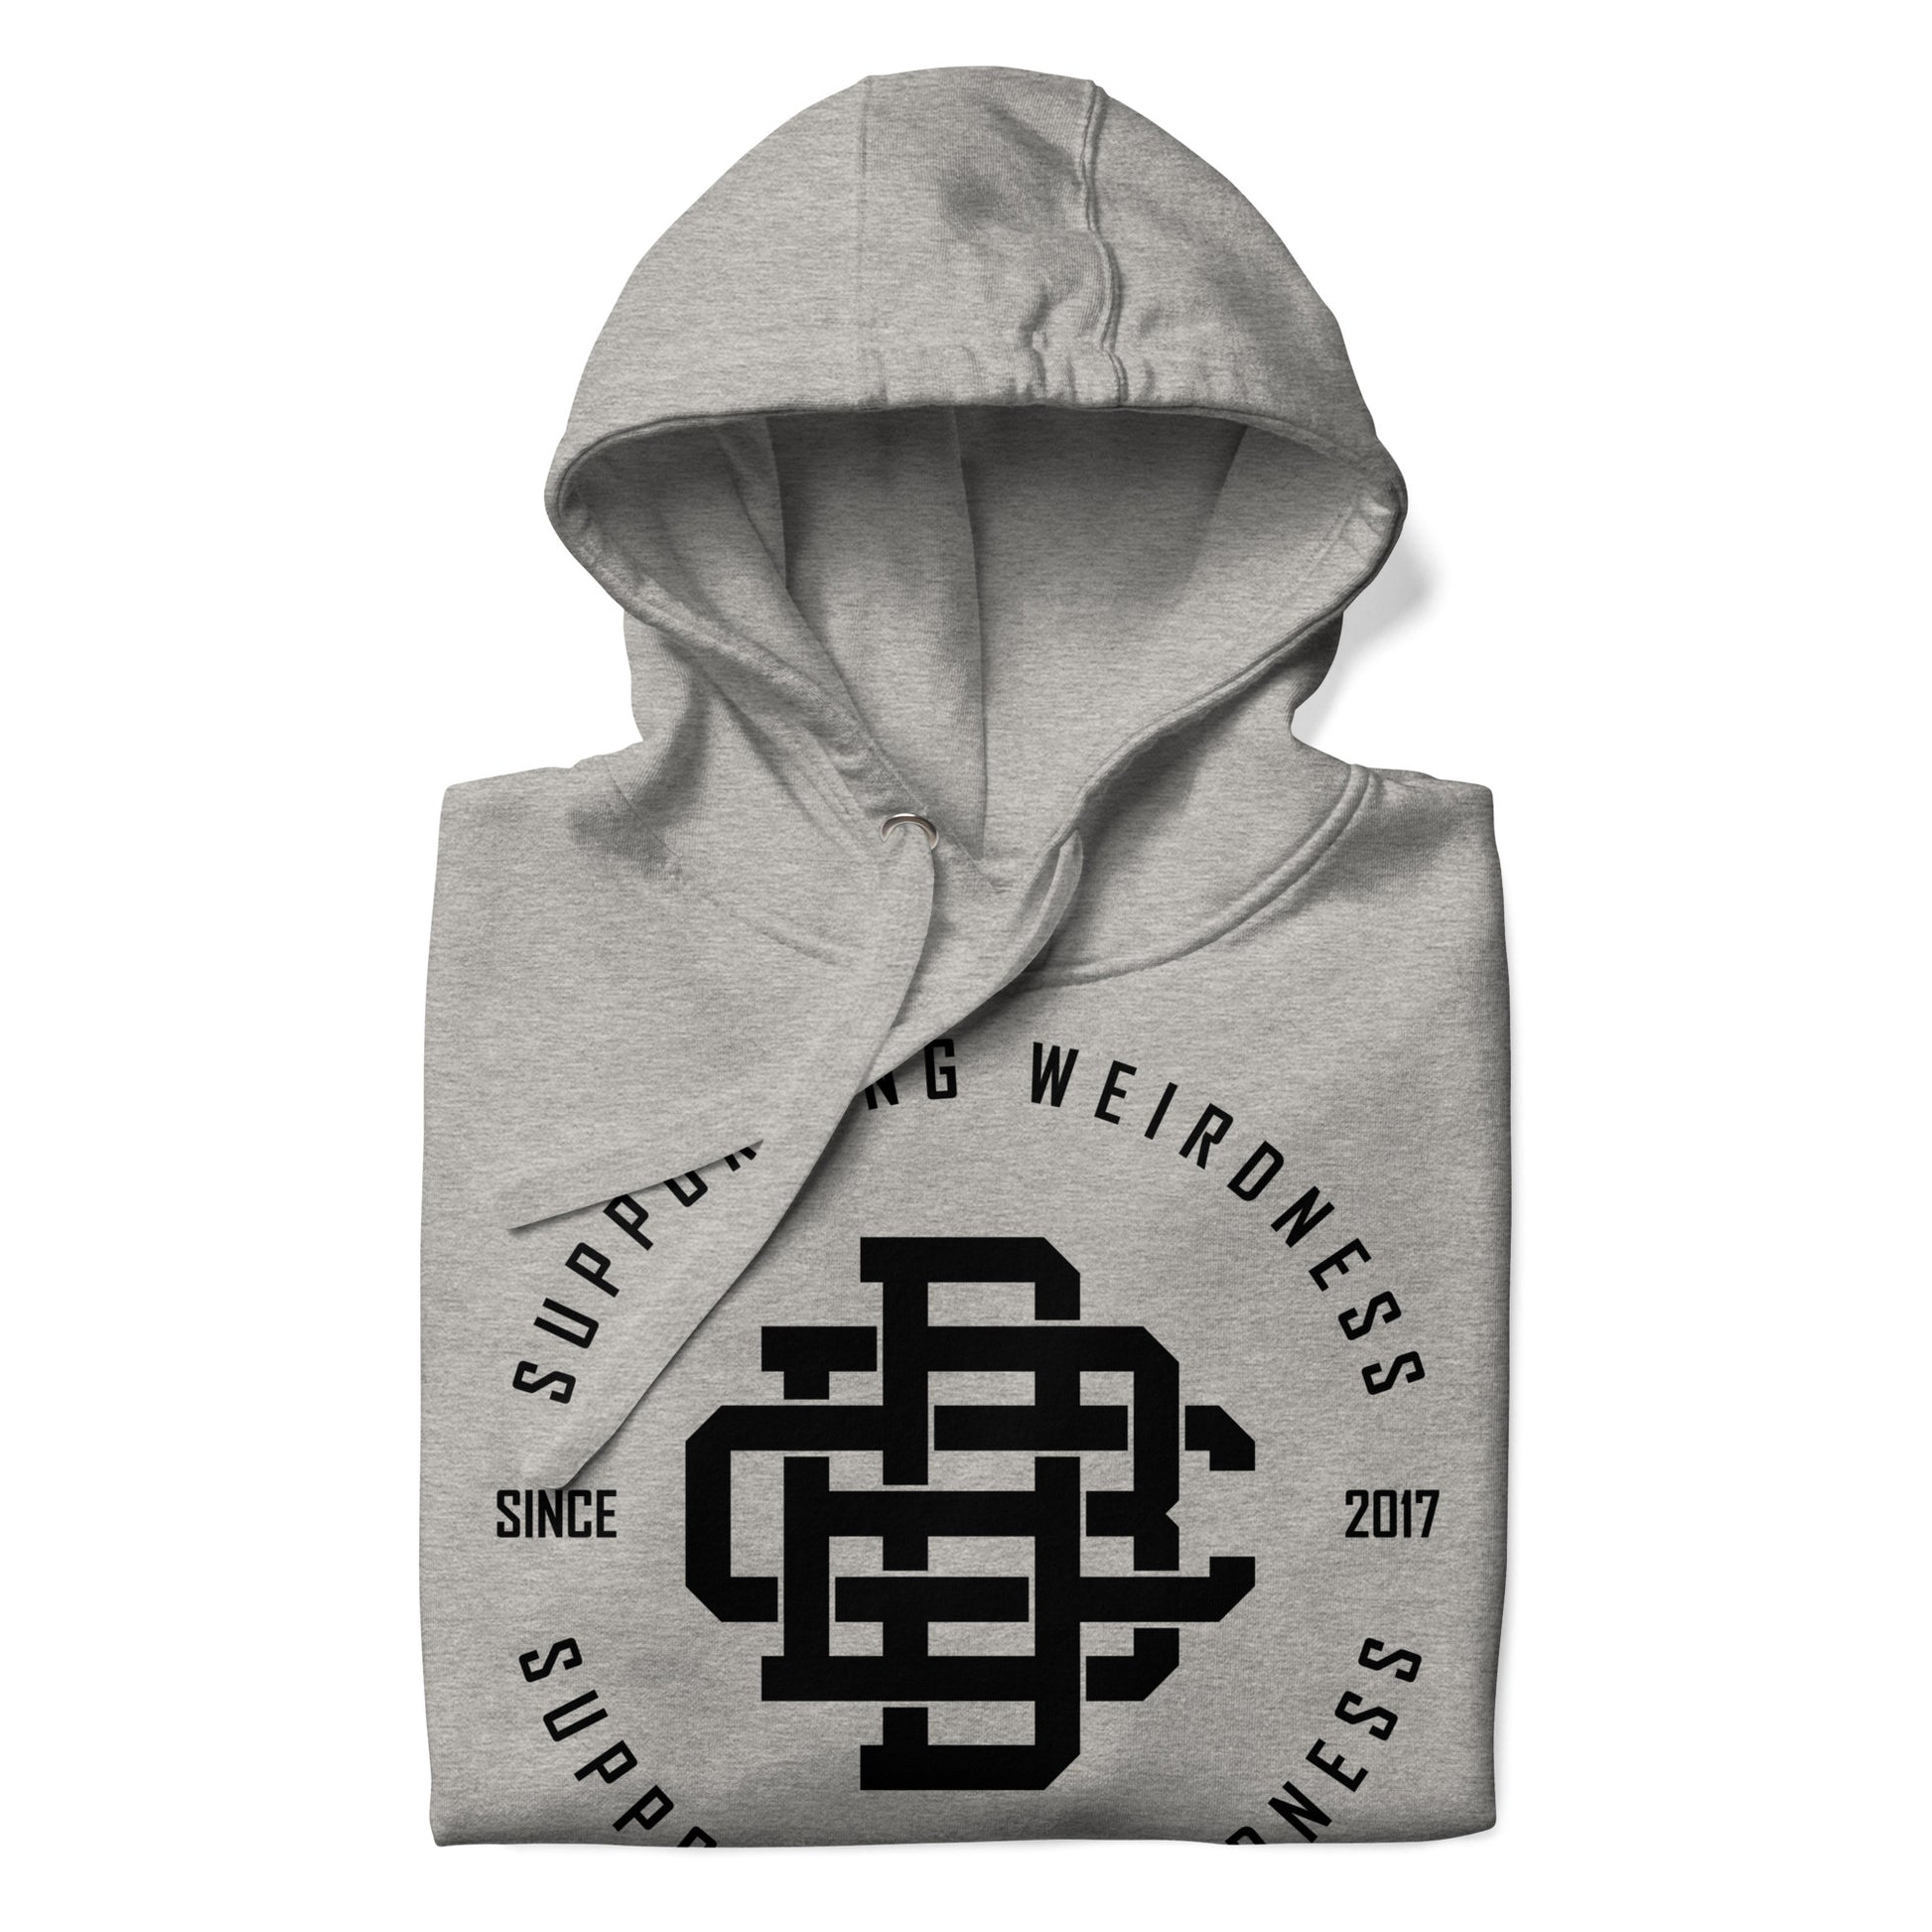 folded BDC hoodie gray by B.Different Clothing street art graffiti inspired brand for weirdos, outsiders, and misfits.